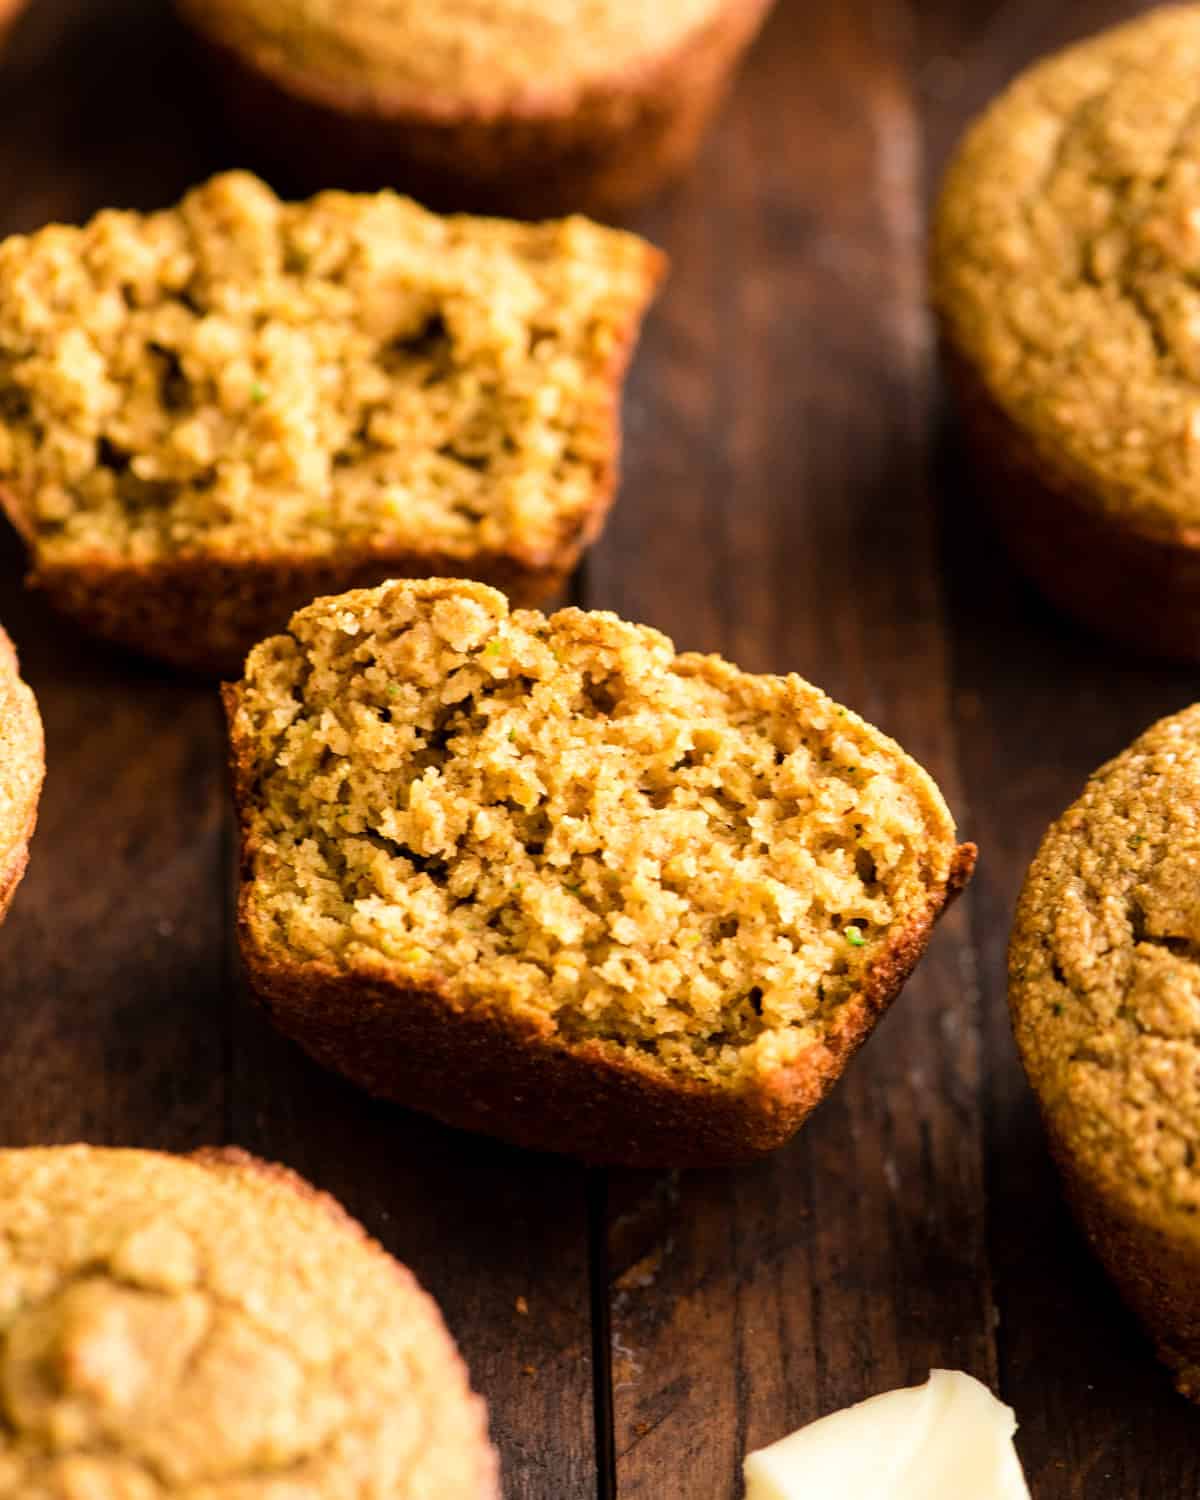 a Carrot Zucchini Muffin cut in half so the texture is visible surrounded by other whole muffins